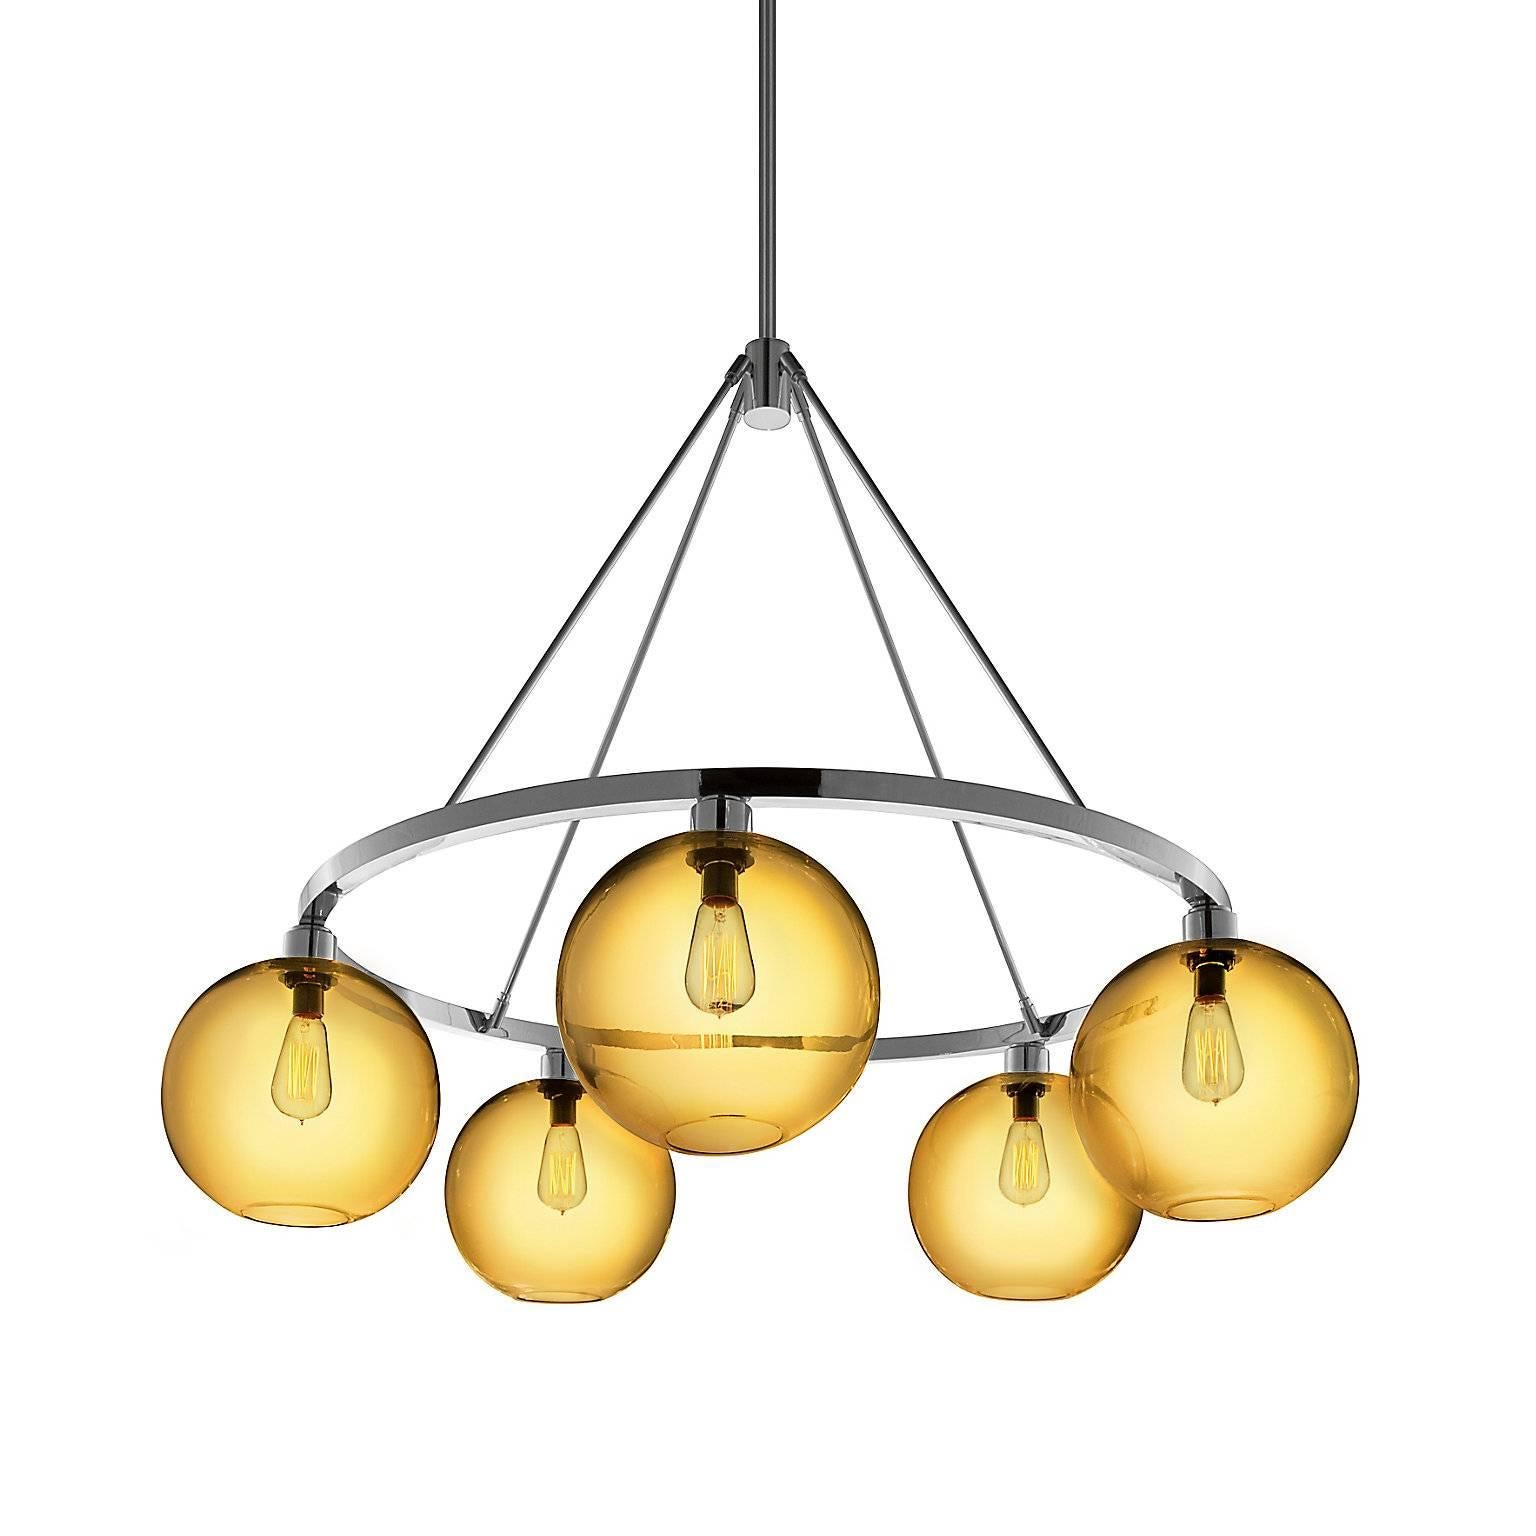 Imbued with timeless style, the striking solitaire chandelier showcases sophisticated metal finishes, a classic, hand-crafted silhouette, and the soft glow of the Edison bulb at its centre. Every single glass light that comes from Niche is handblown